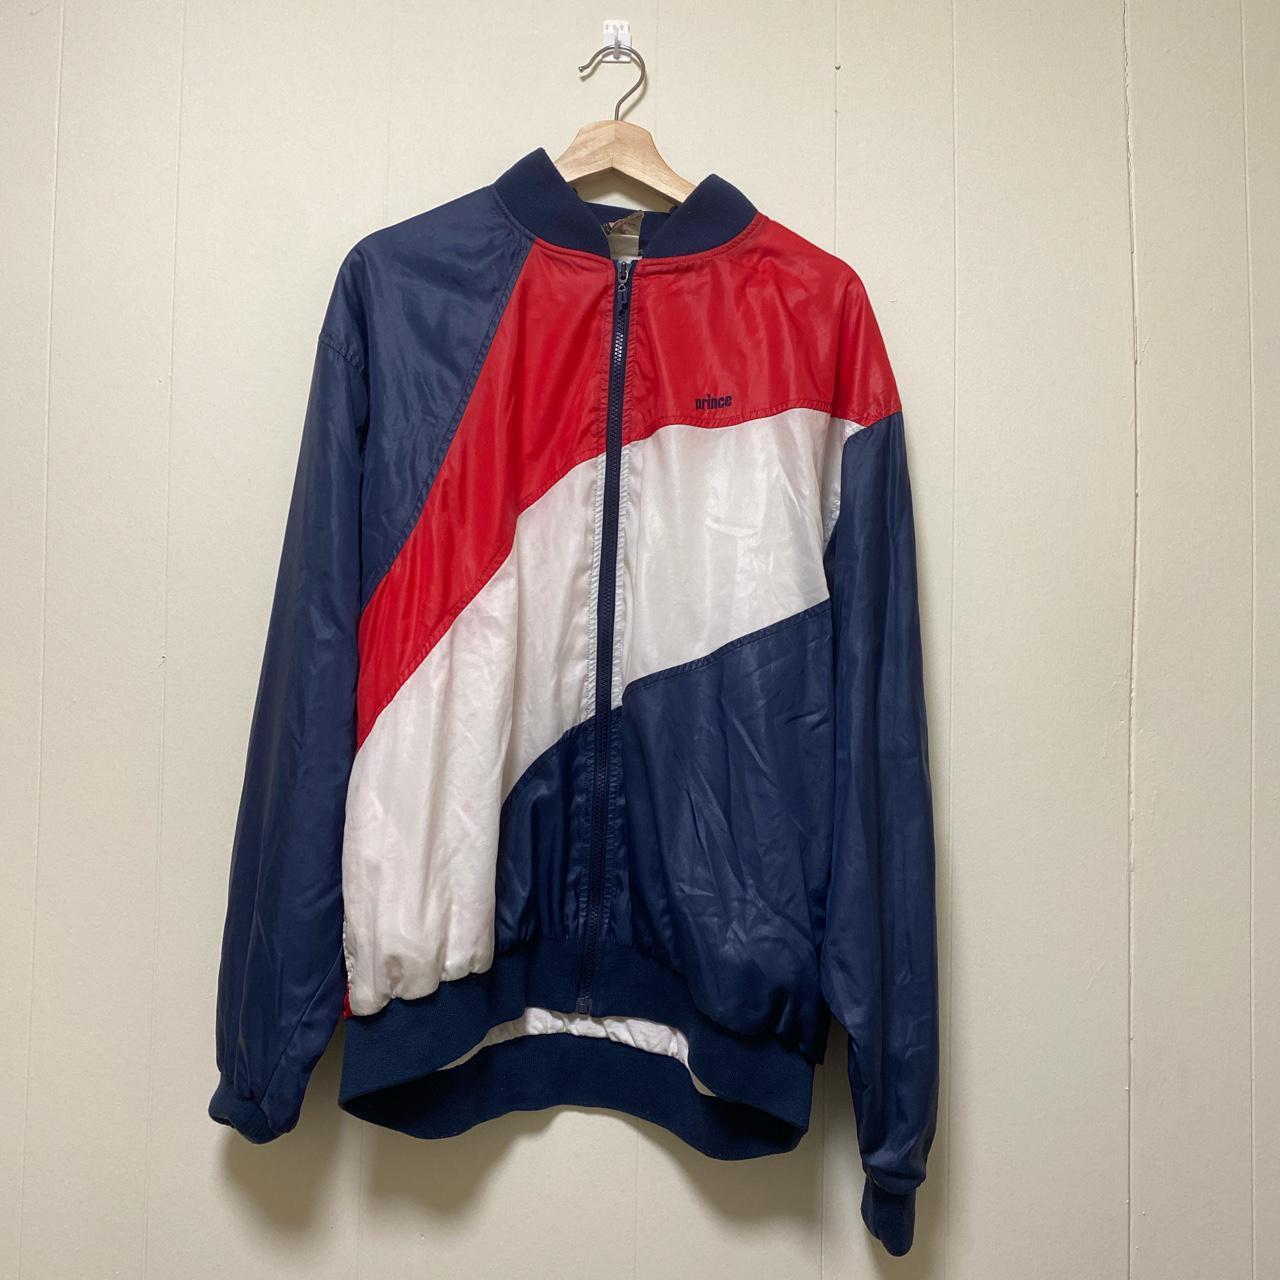 Prince Men's Blue and Red Jacket